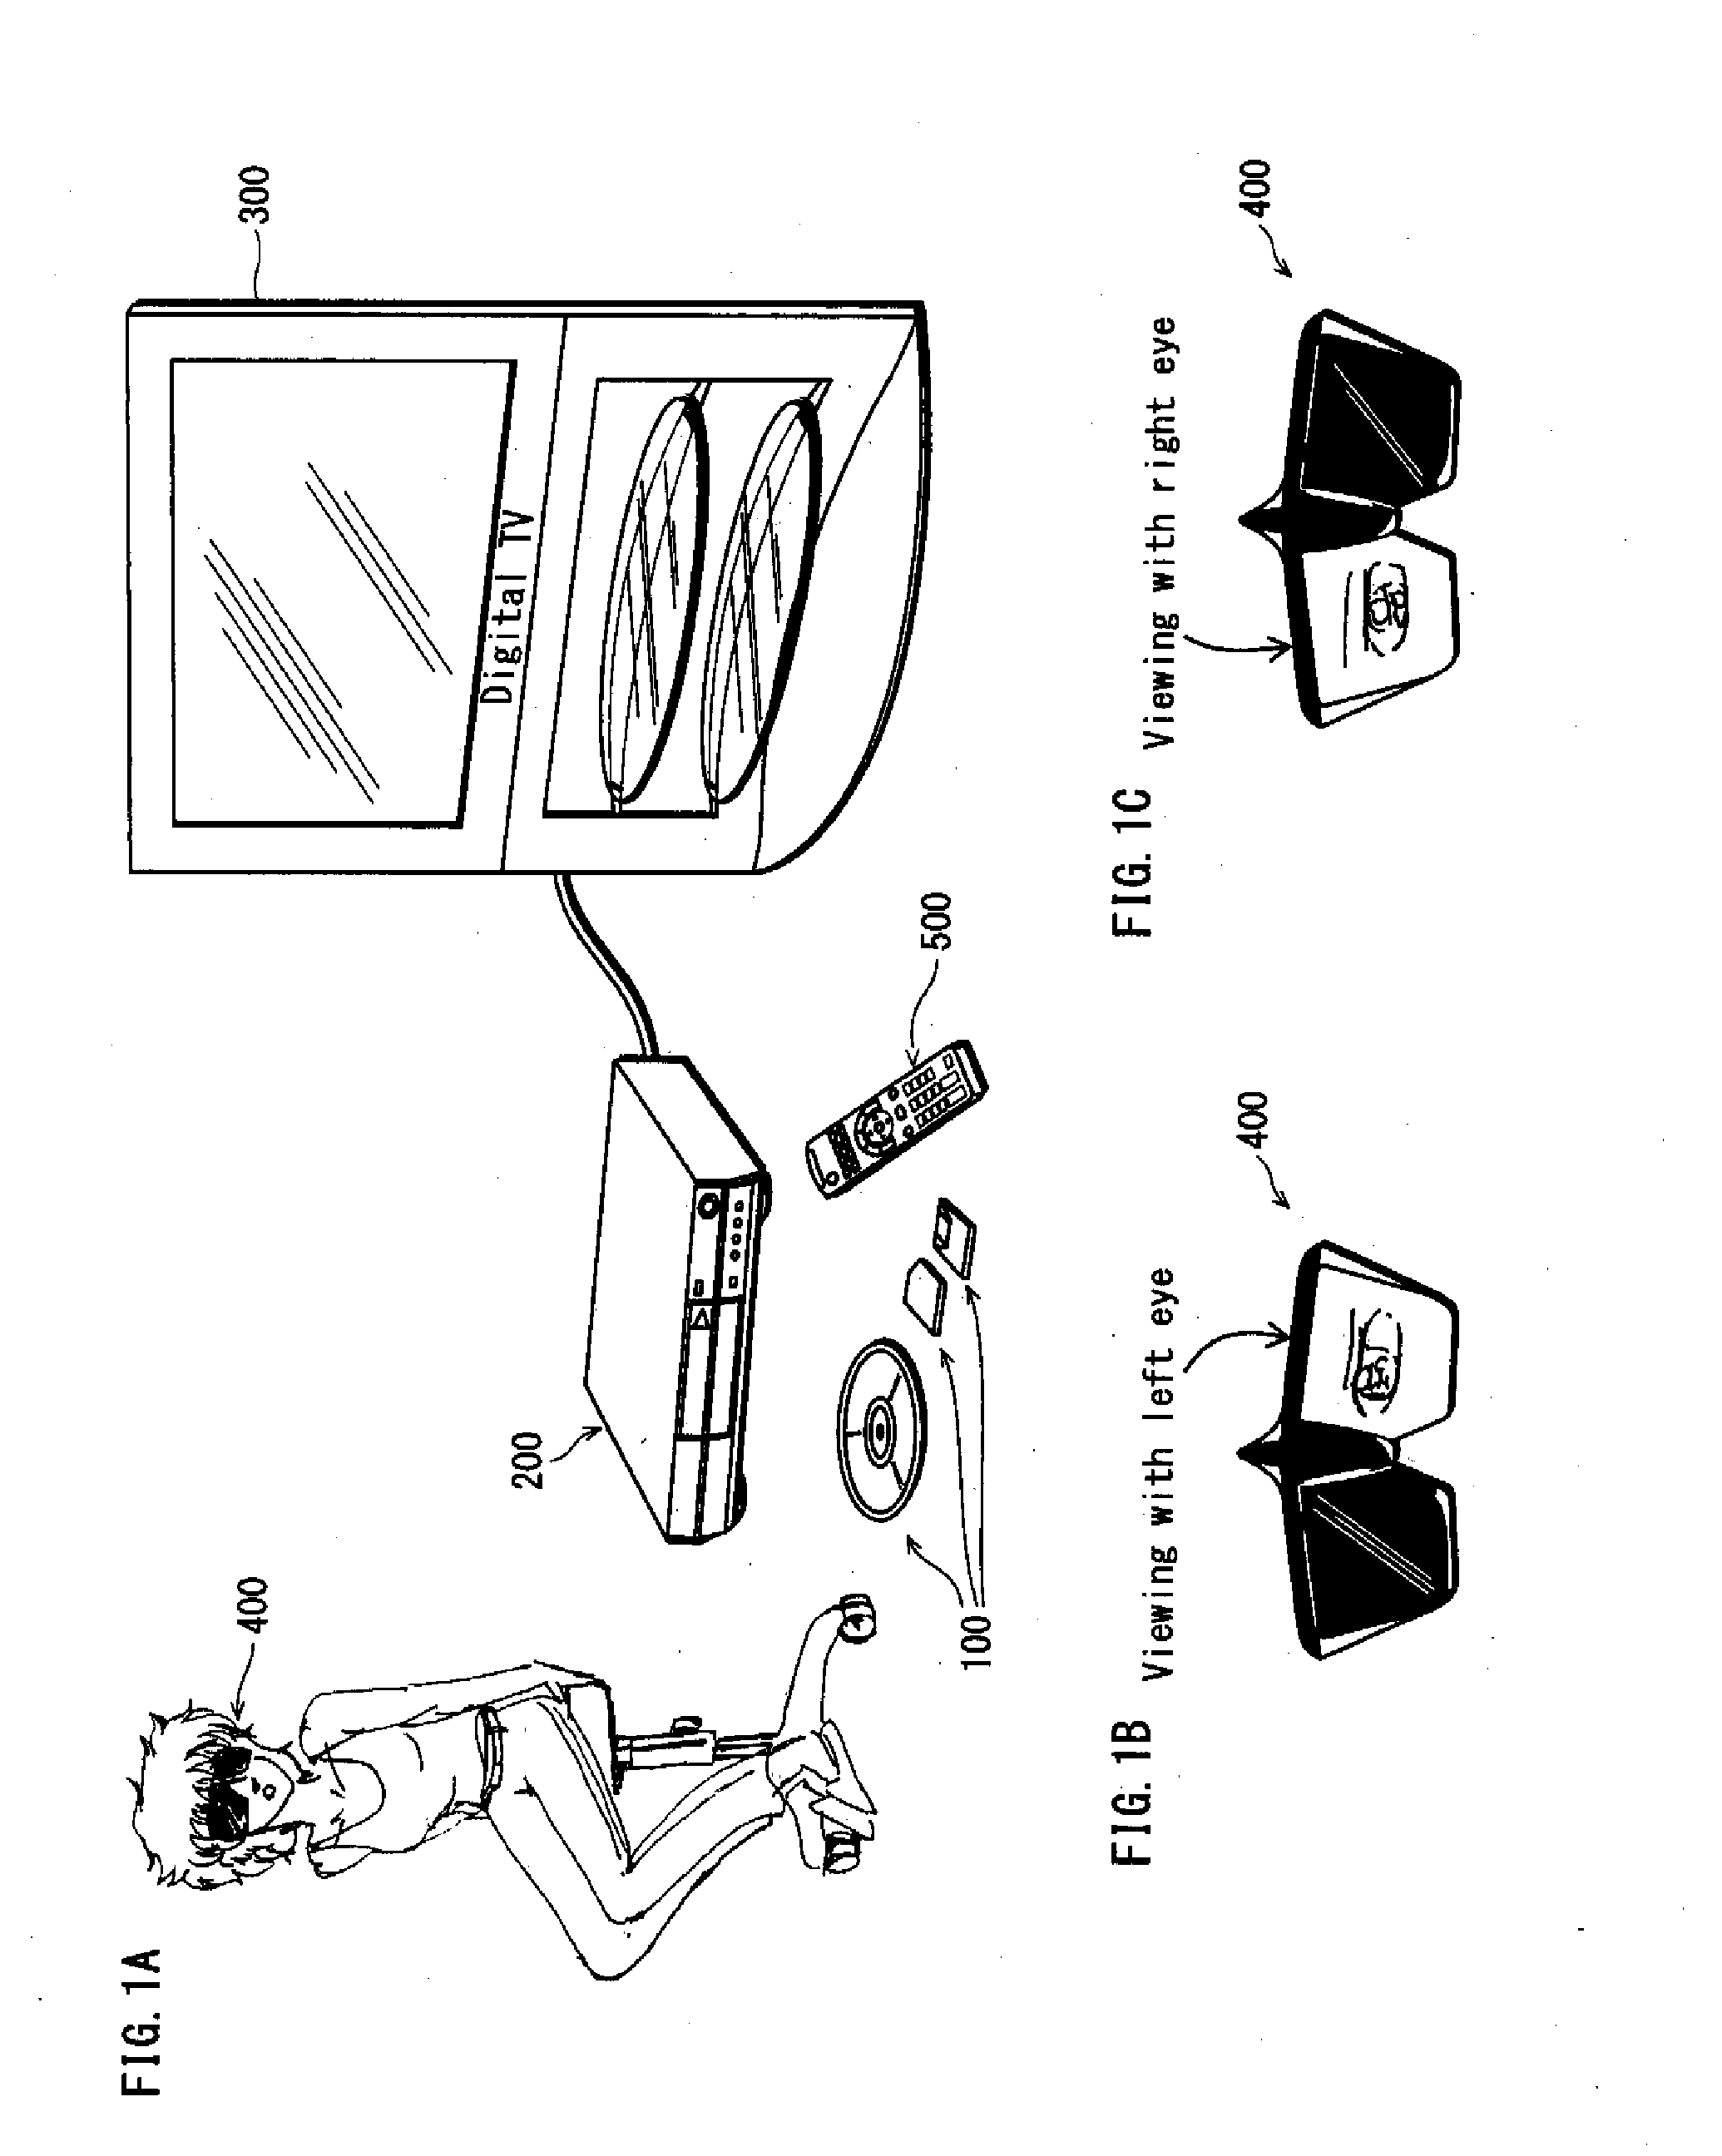 Recording medium, playback device, and integrated circuit